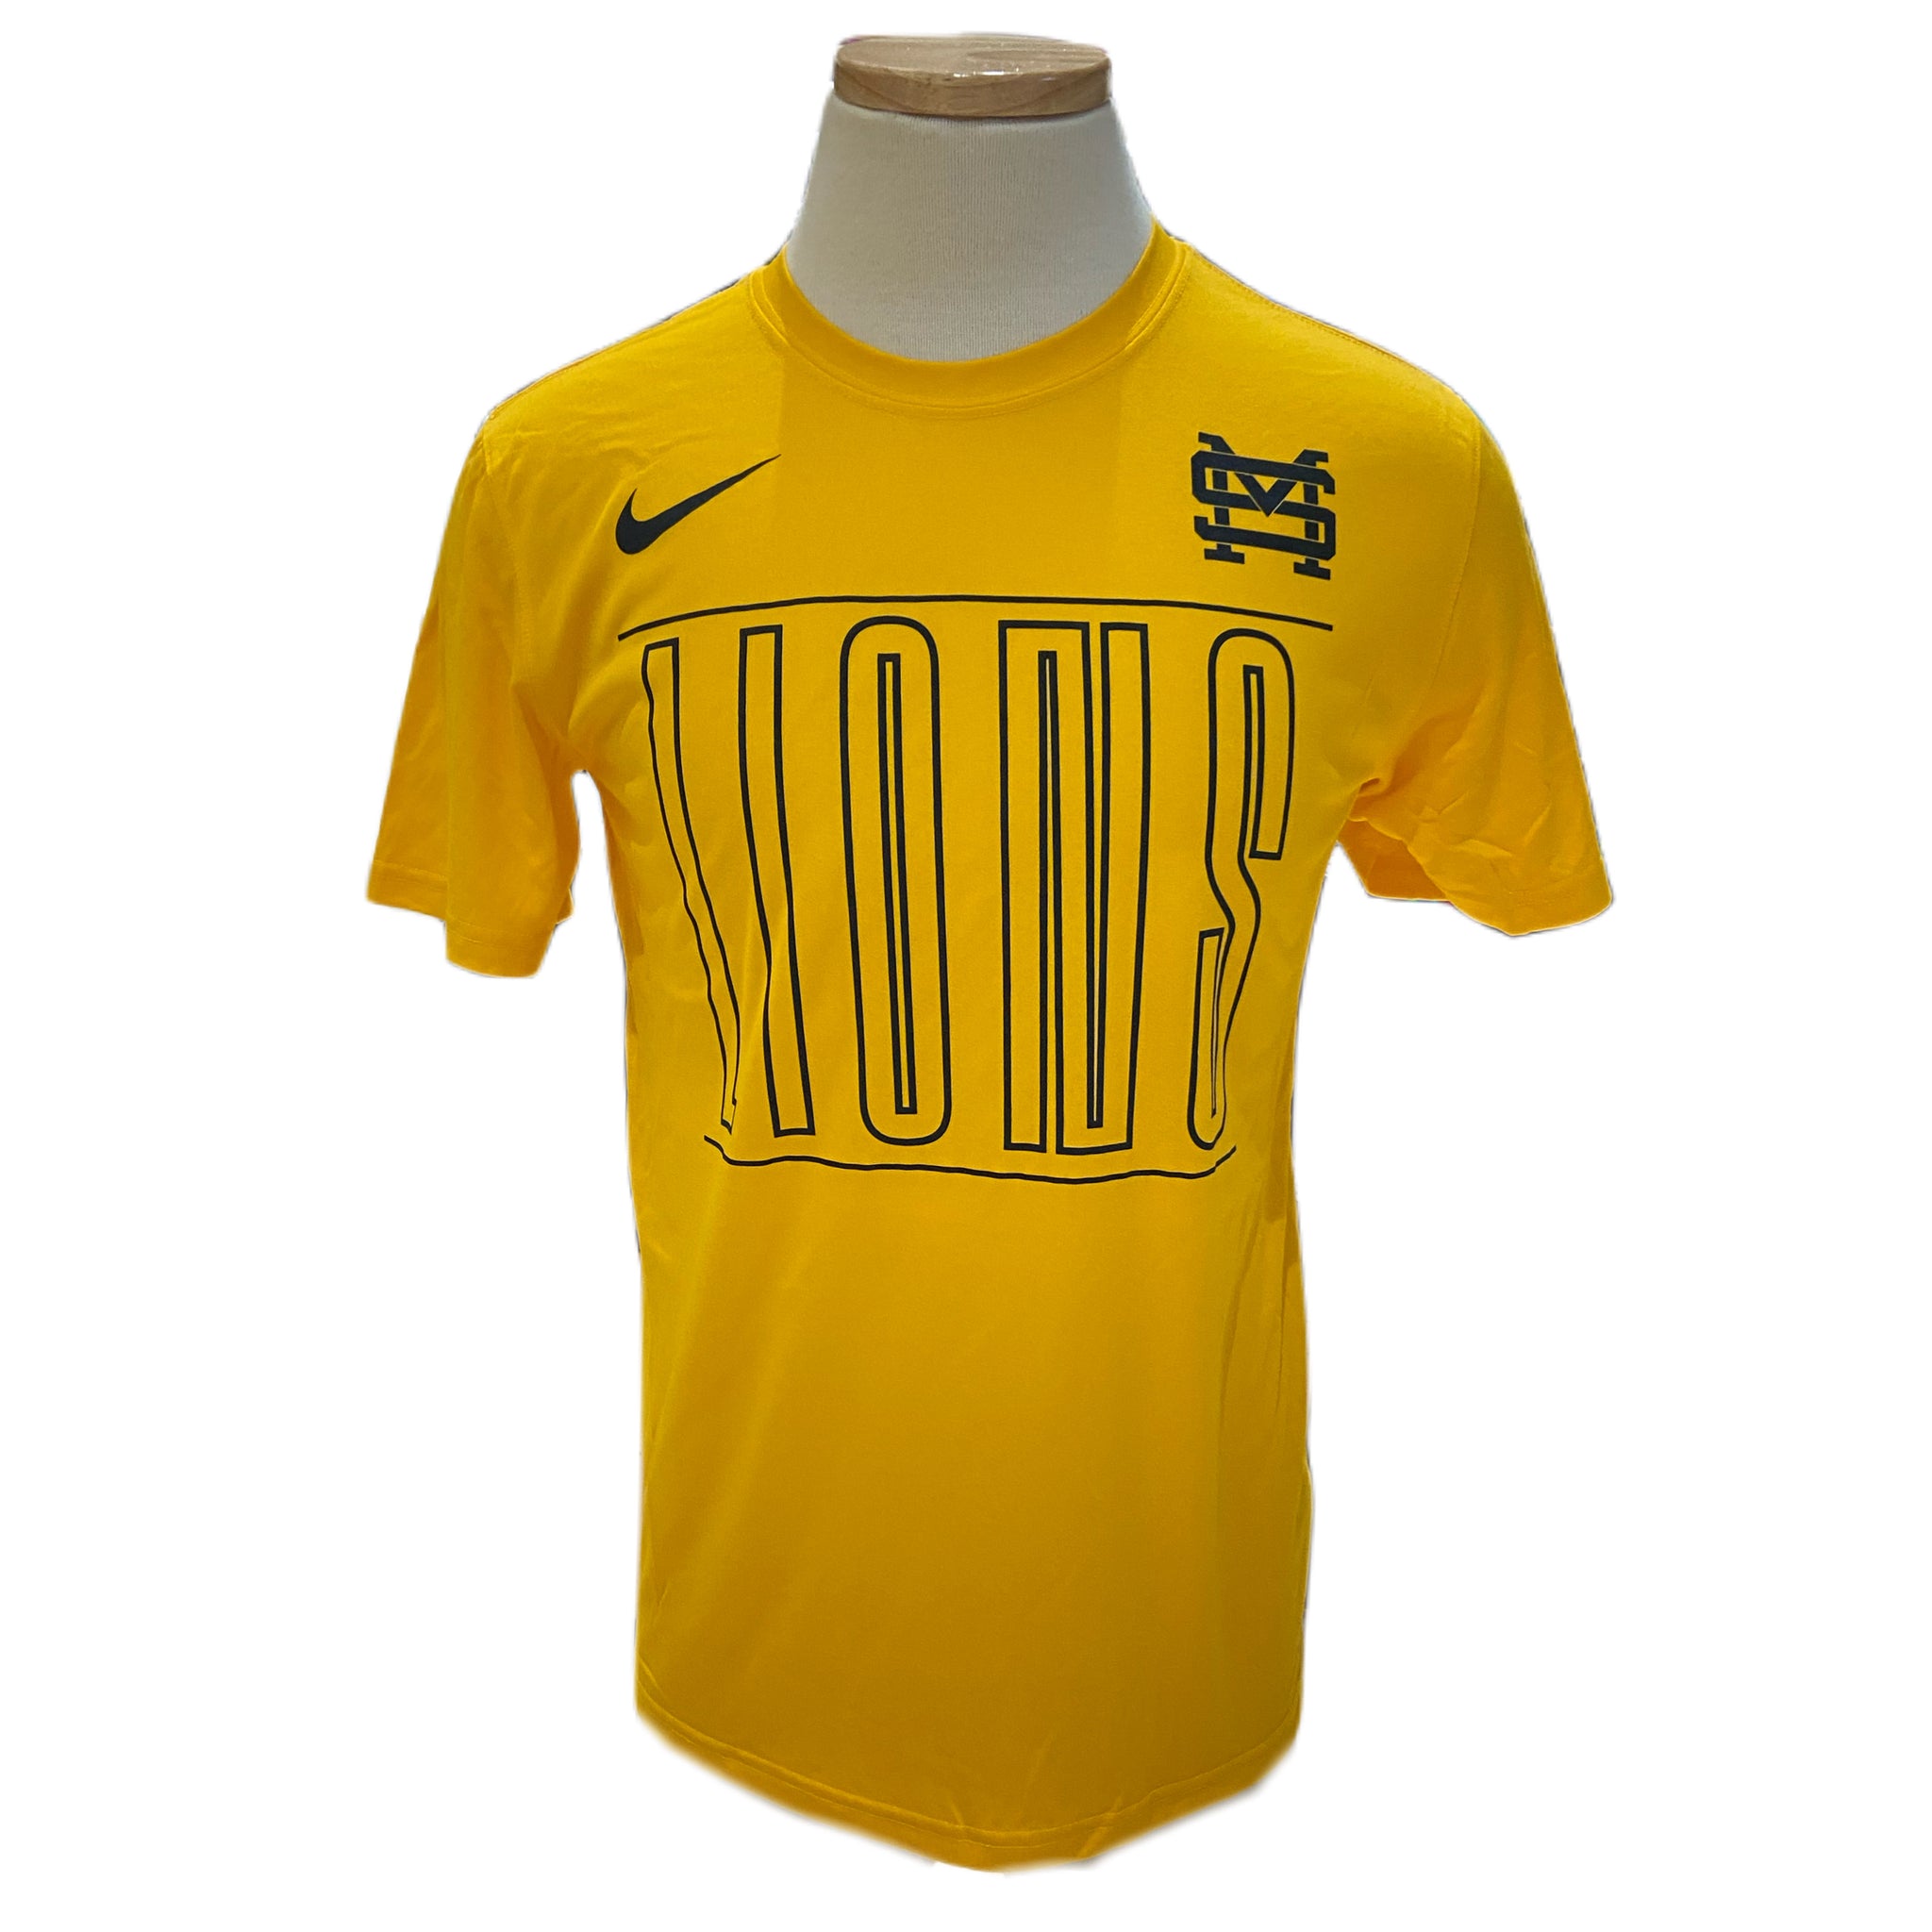 Nike Legend SS Gold Tee with LIONS